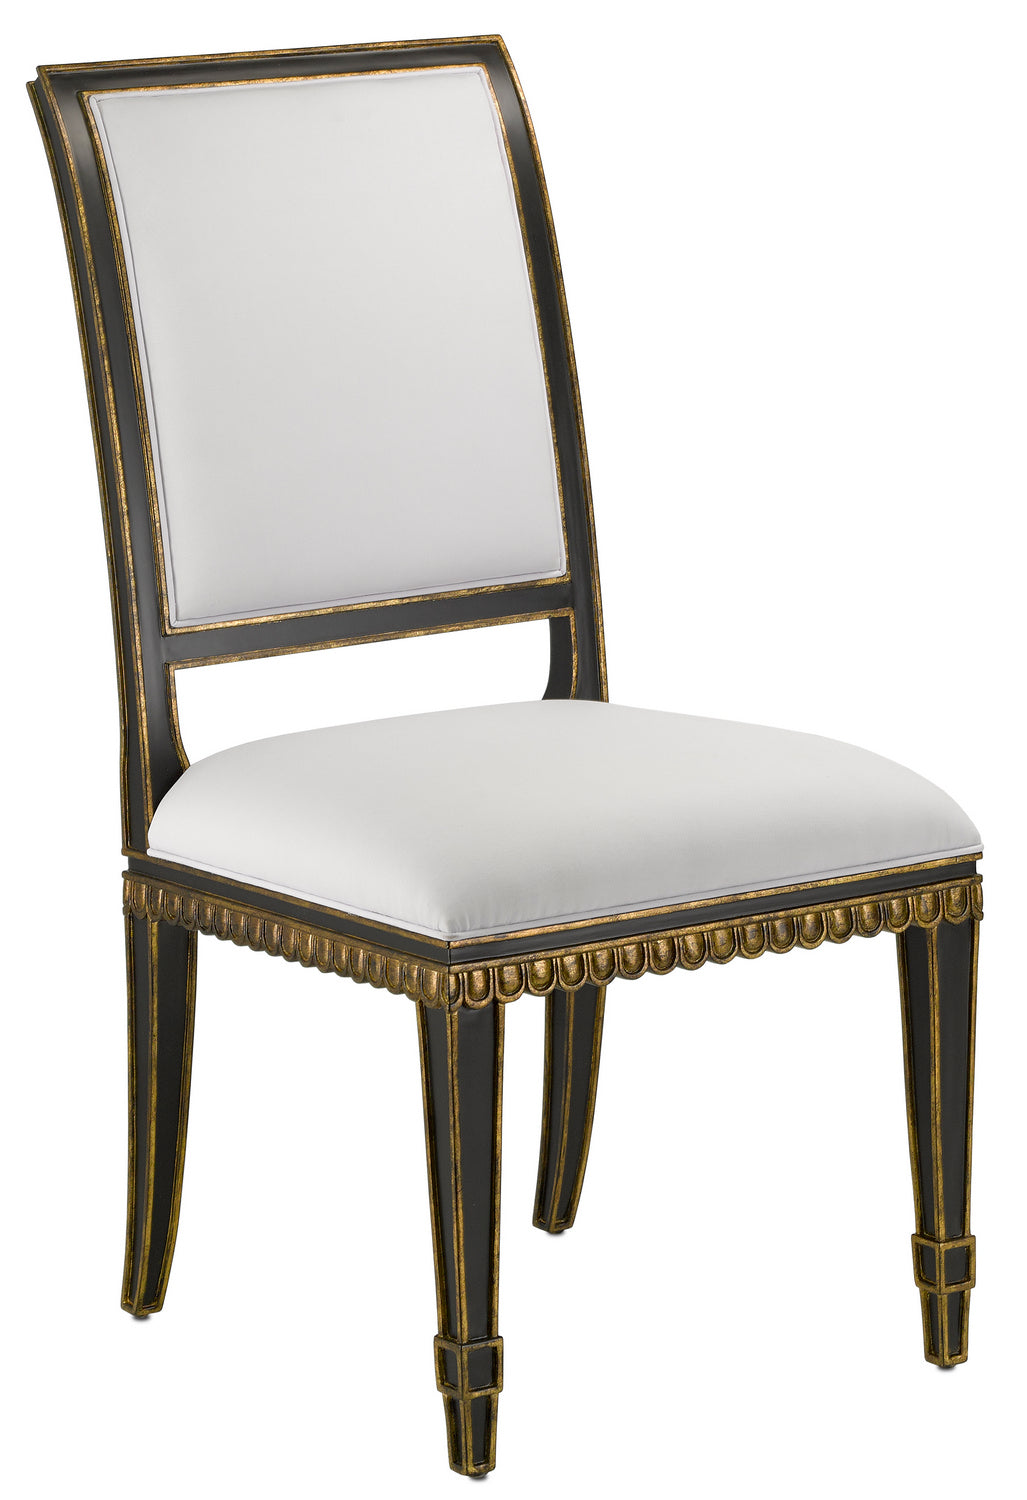 Chair from the Ines collection in Caviar Black/Antique Black finish